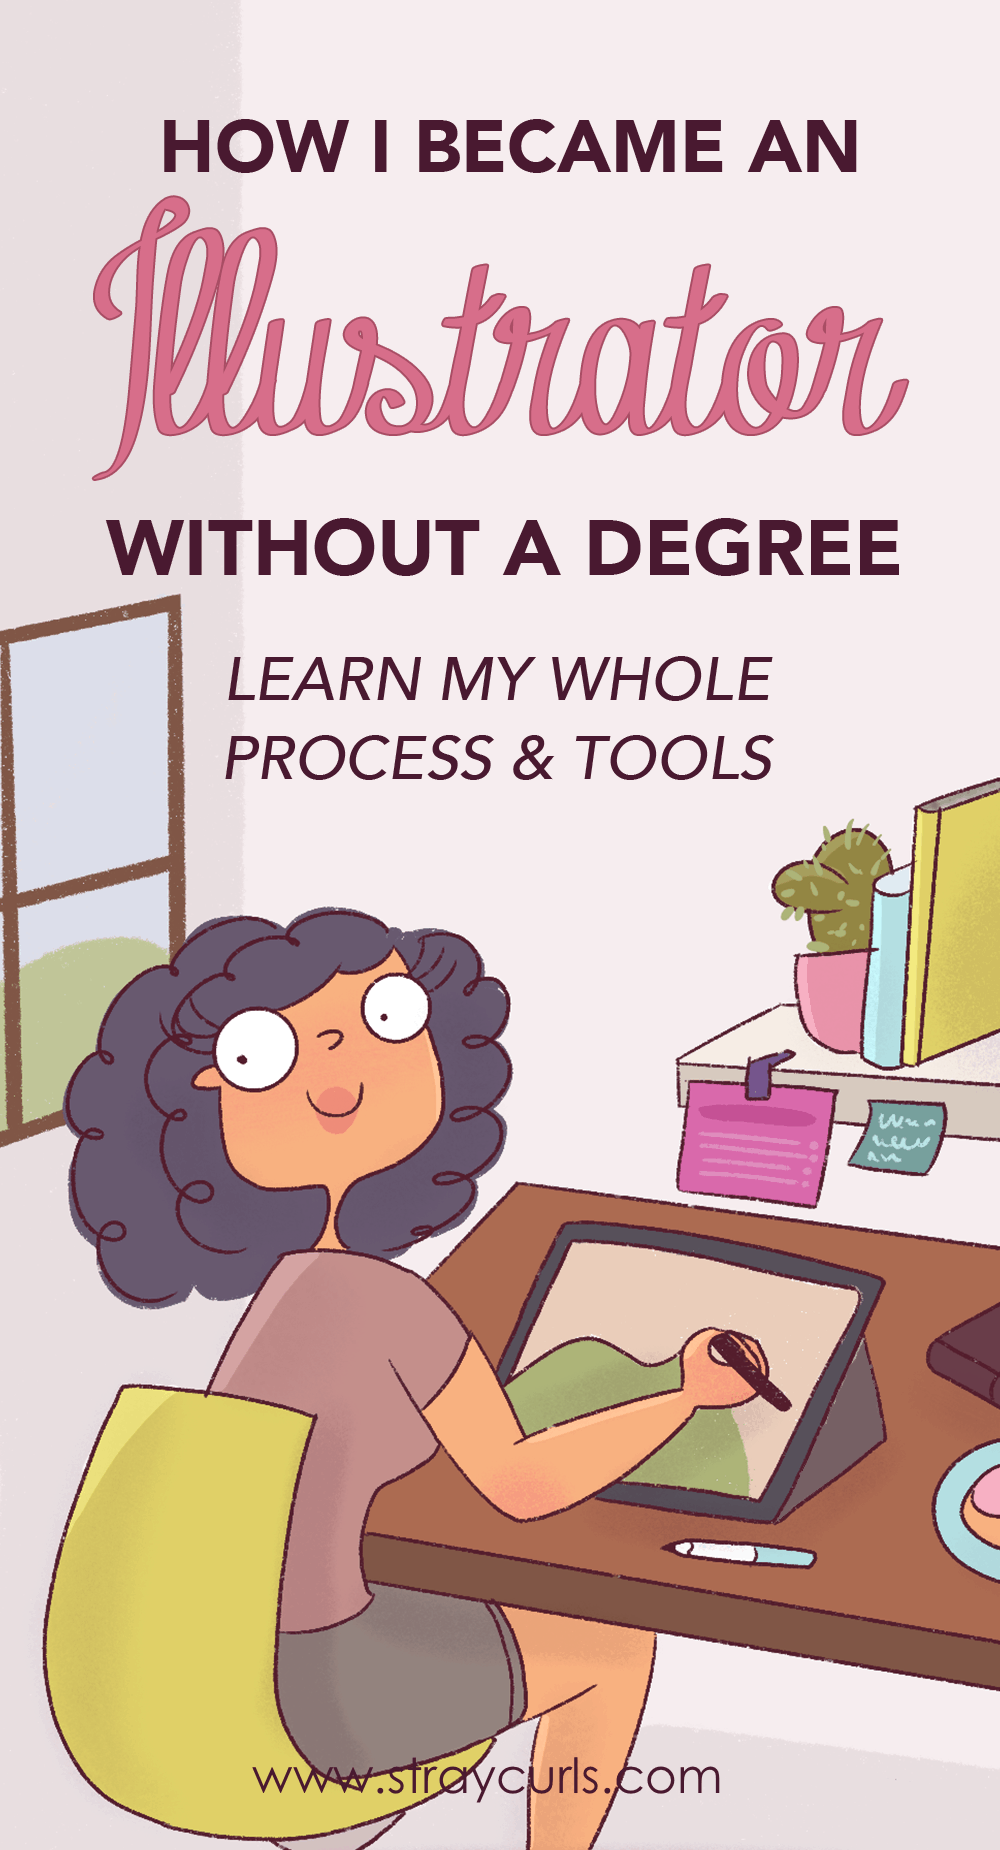 How to become an illustrator without a degree. Learn how to become a self-taught illustrator and pick up illustrating skills with no experience or degree. I cover all the illustrating tools I use and my illustrating process in this post. Digital artist illusration